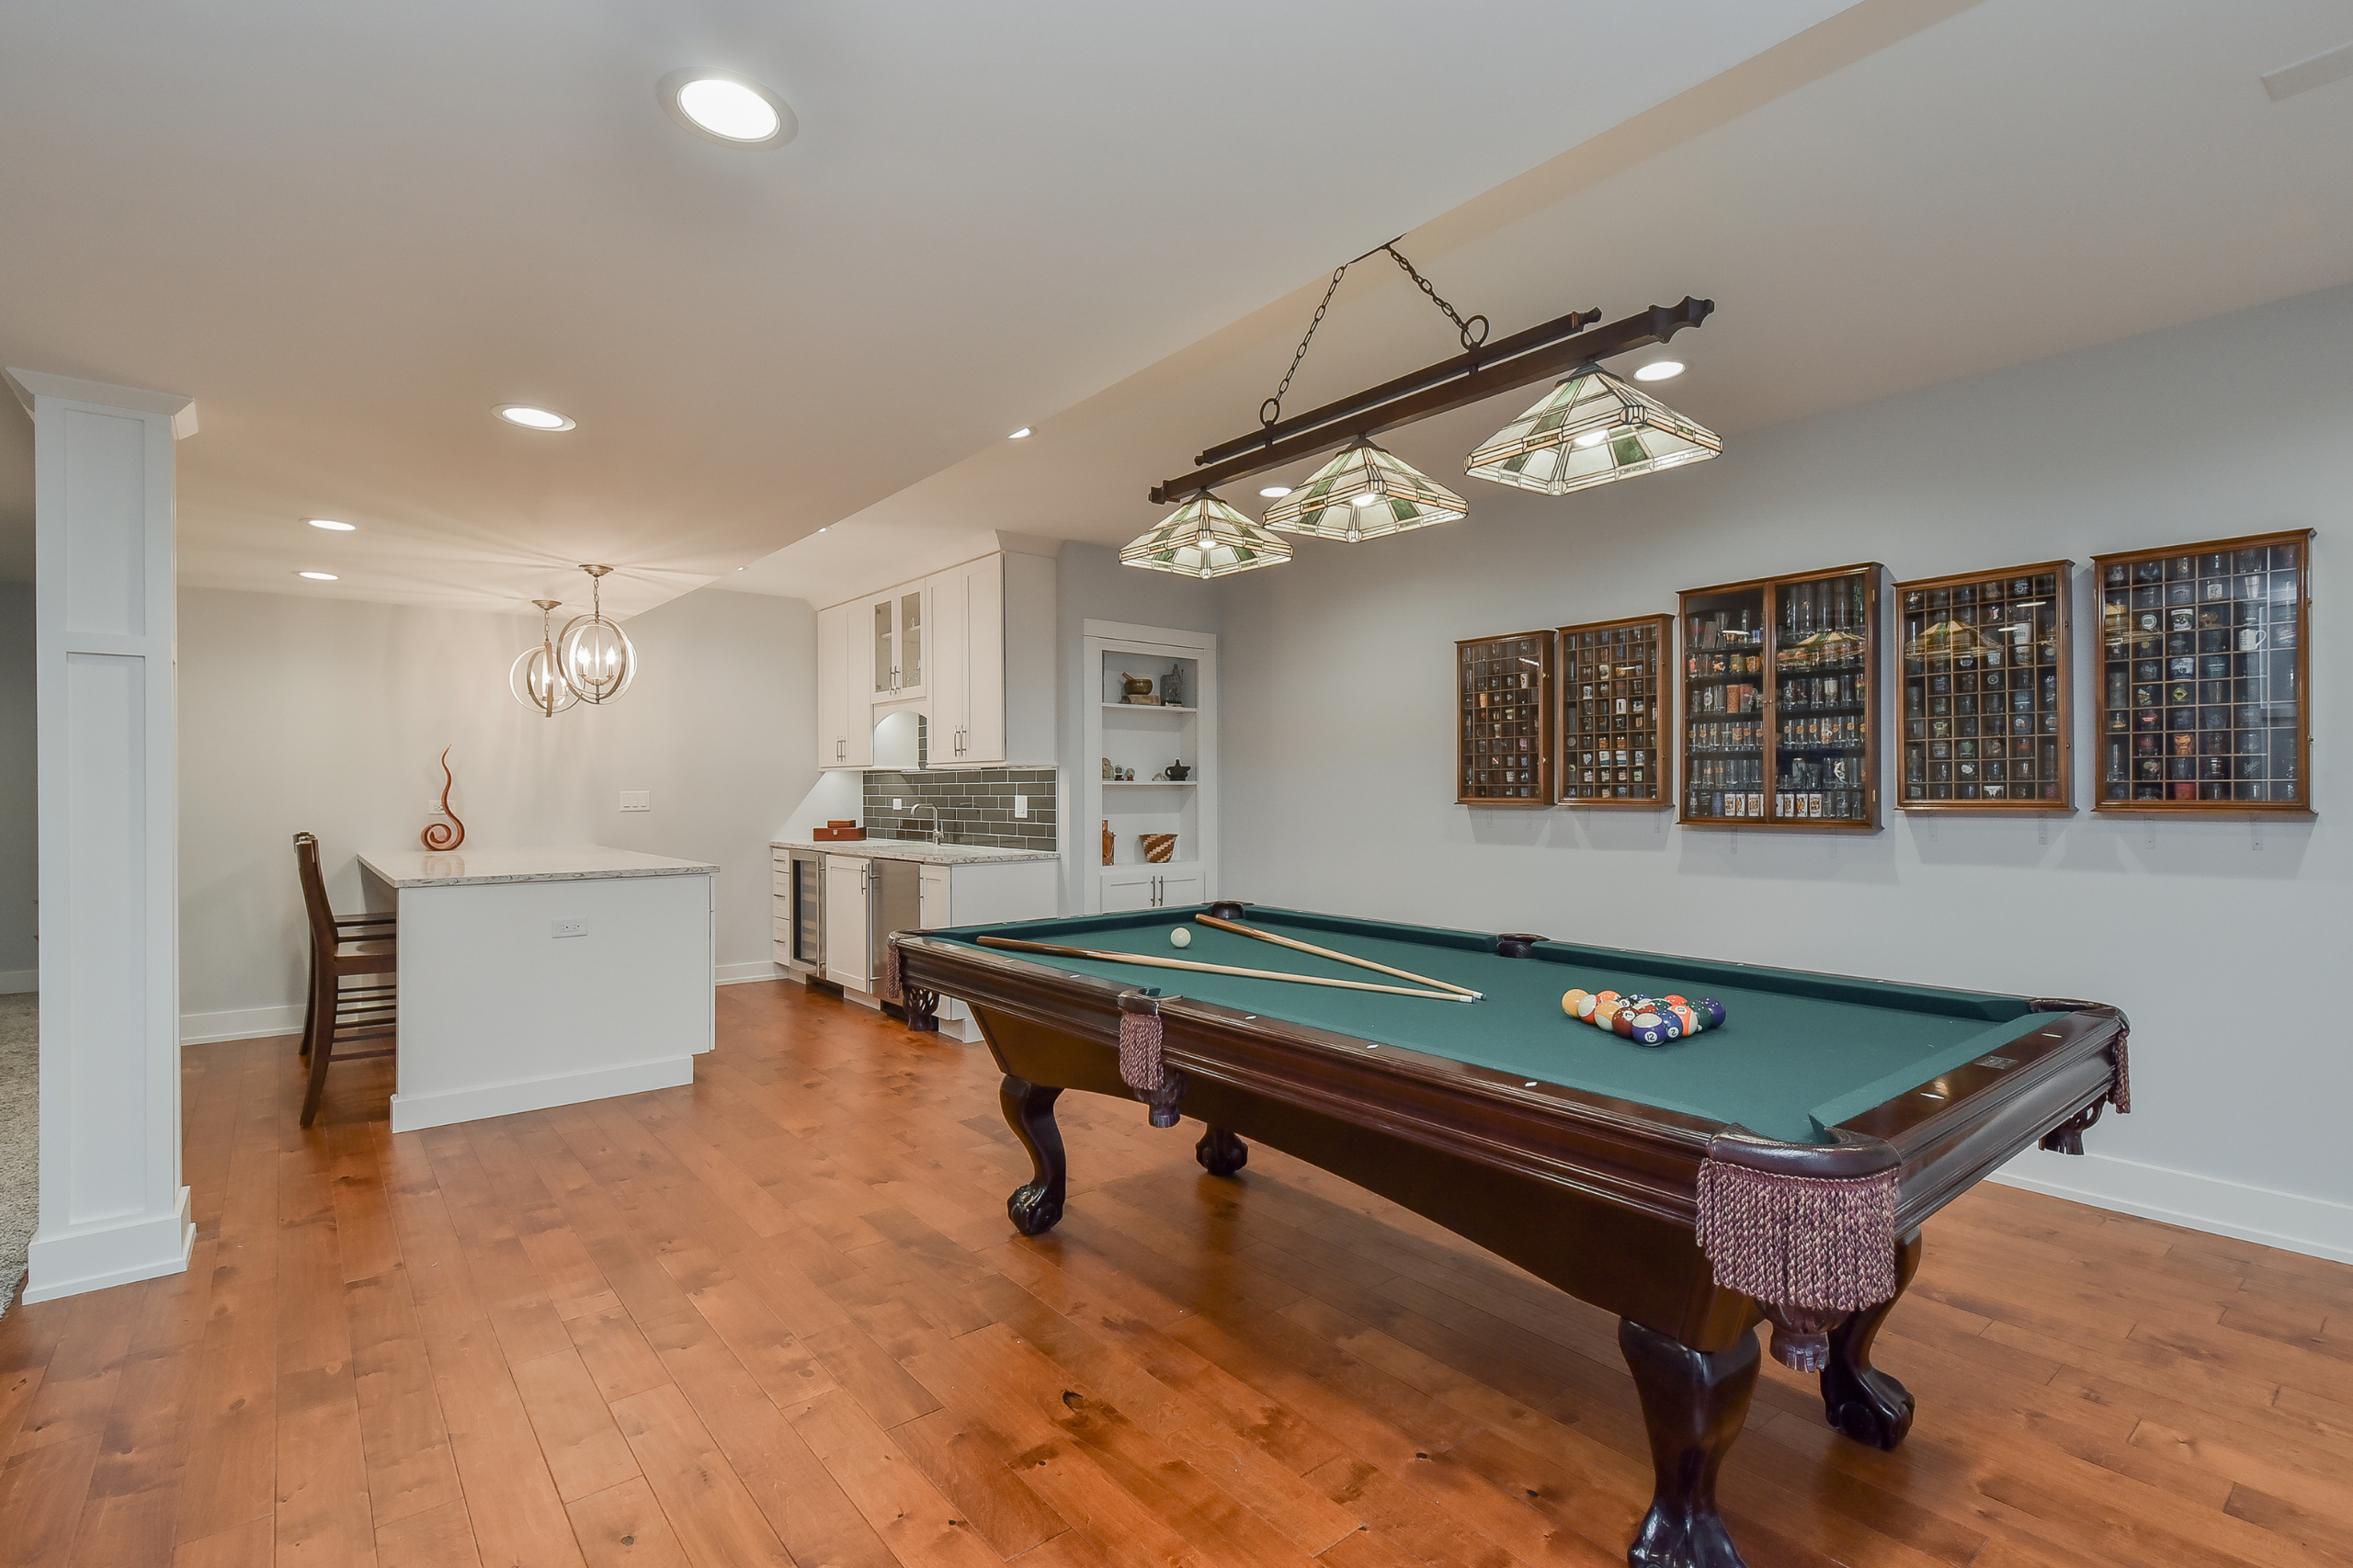 gaming-and-pool-table-room-sizes-sebring-design-build